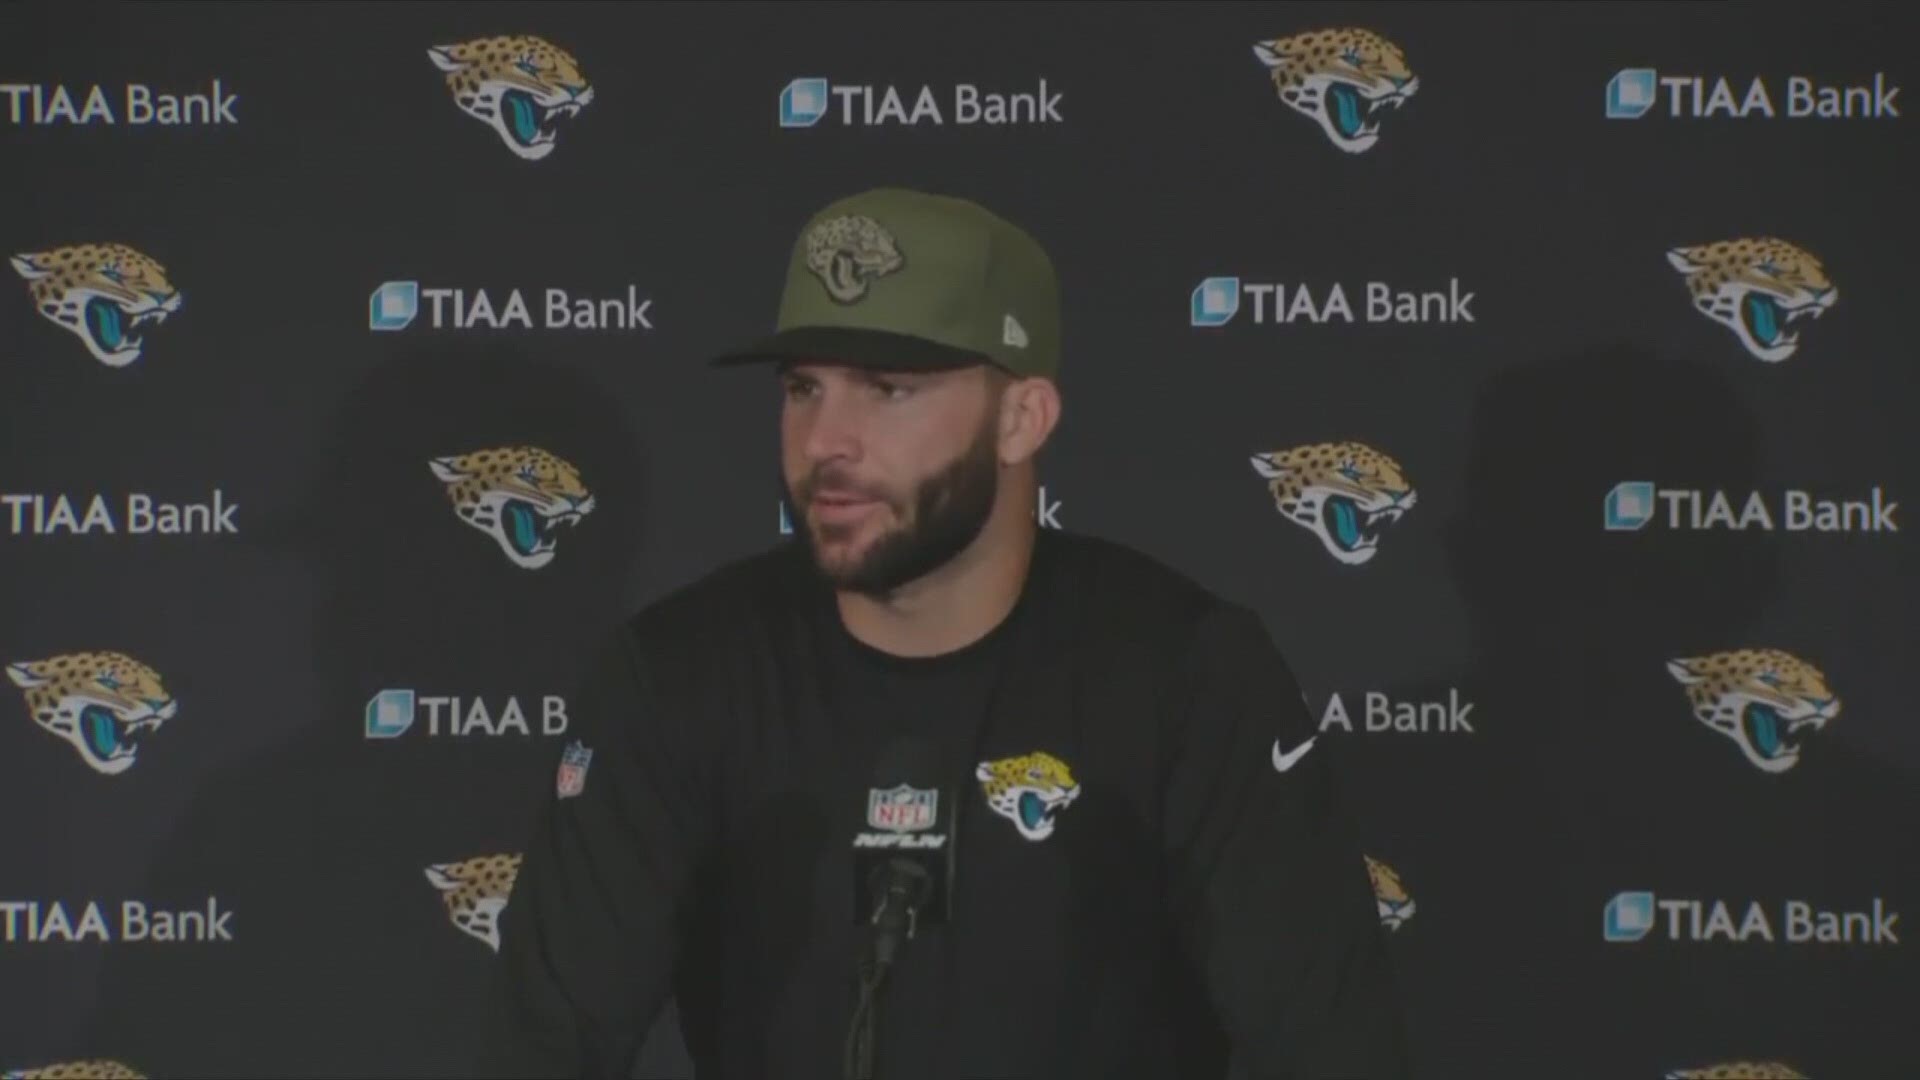 Jaguars QB Blake Bortles says "this is not a team that should be losing games like this," after the Jags lost to the Colts 29-26.